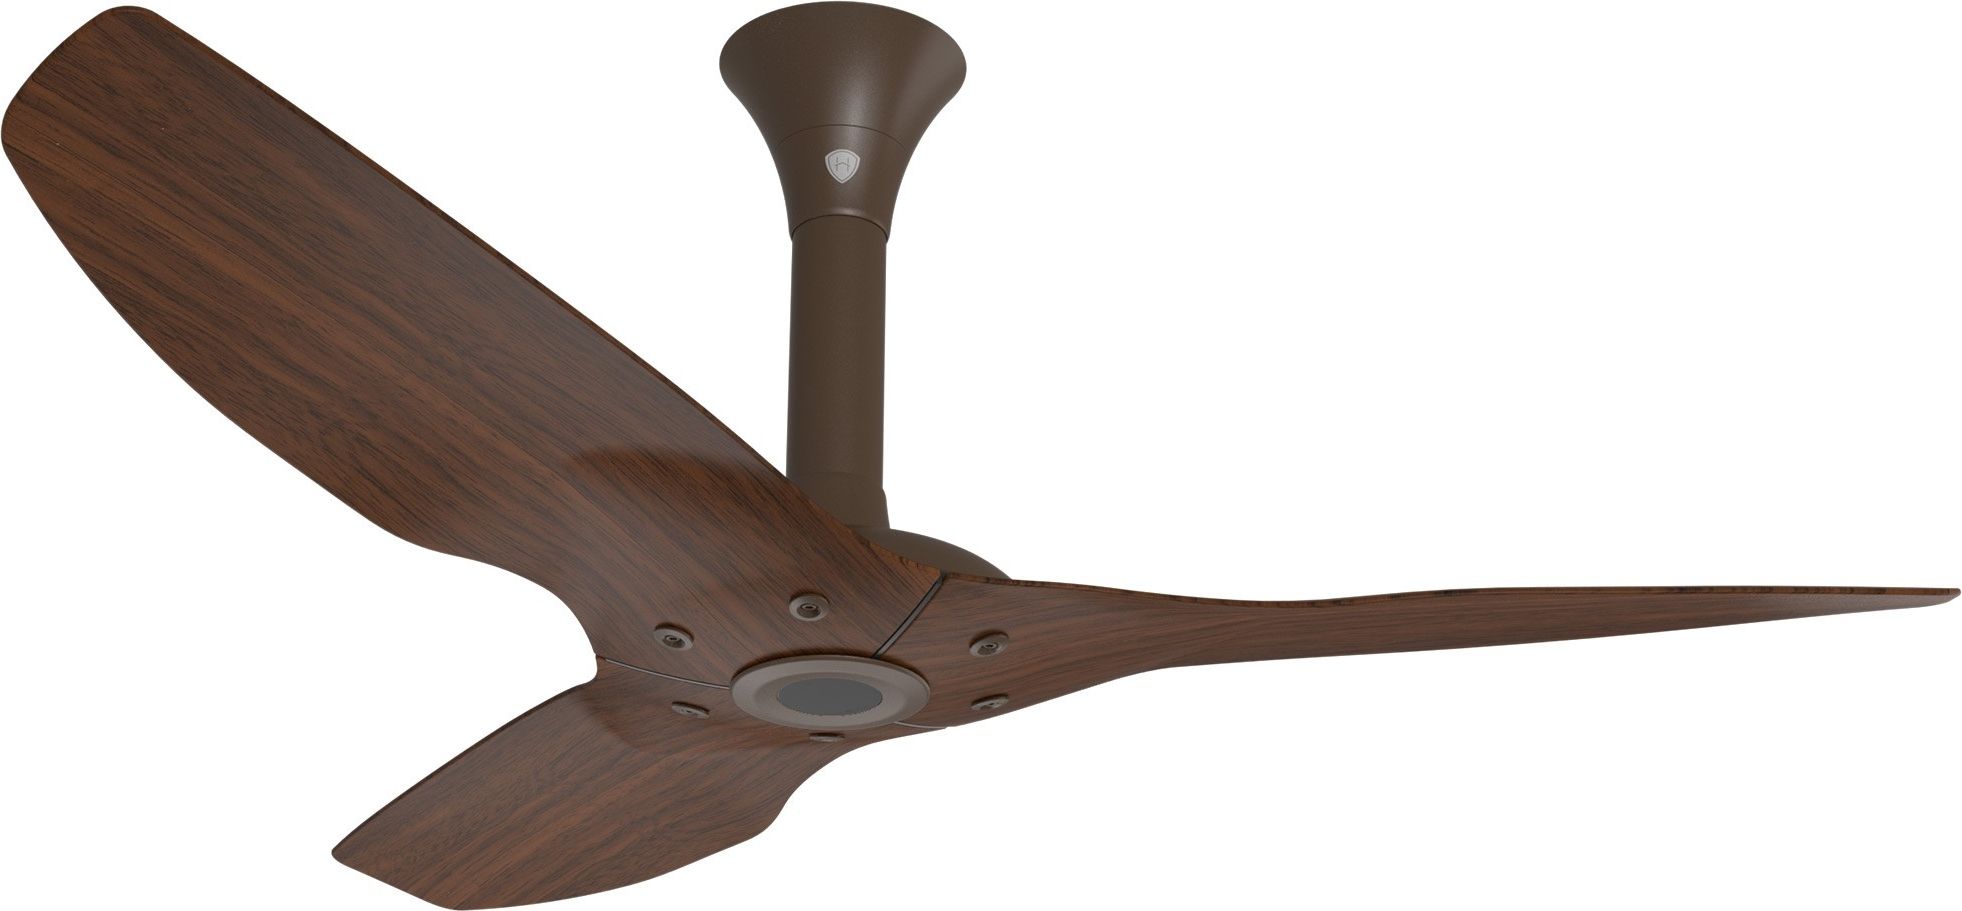 Latest Haiku Outdoor Ceiling Fan: 52", Cocoa Woodgrain Aluminum, Standard For Outdoor Ceiling Fans With Speakers (View 6 of 20)